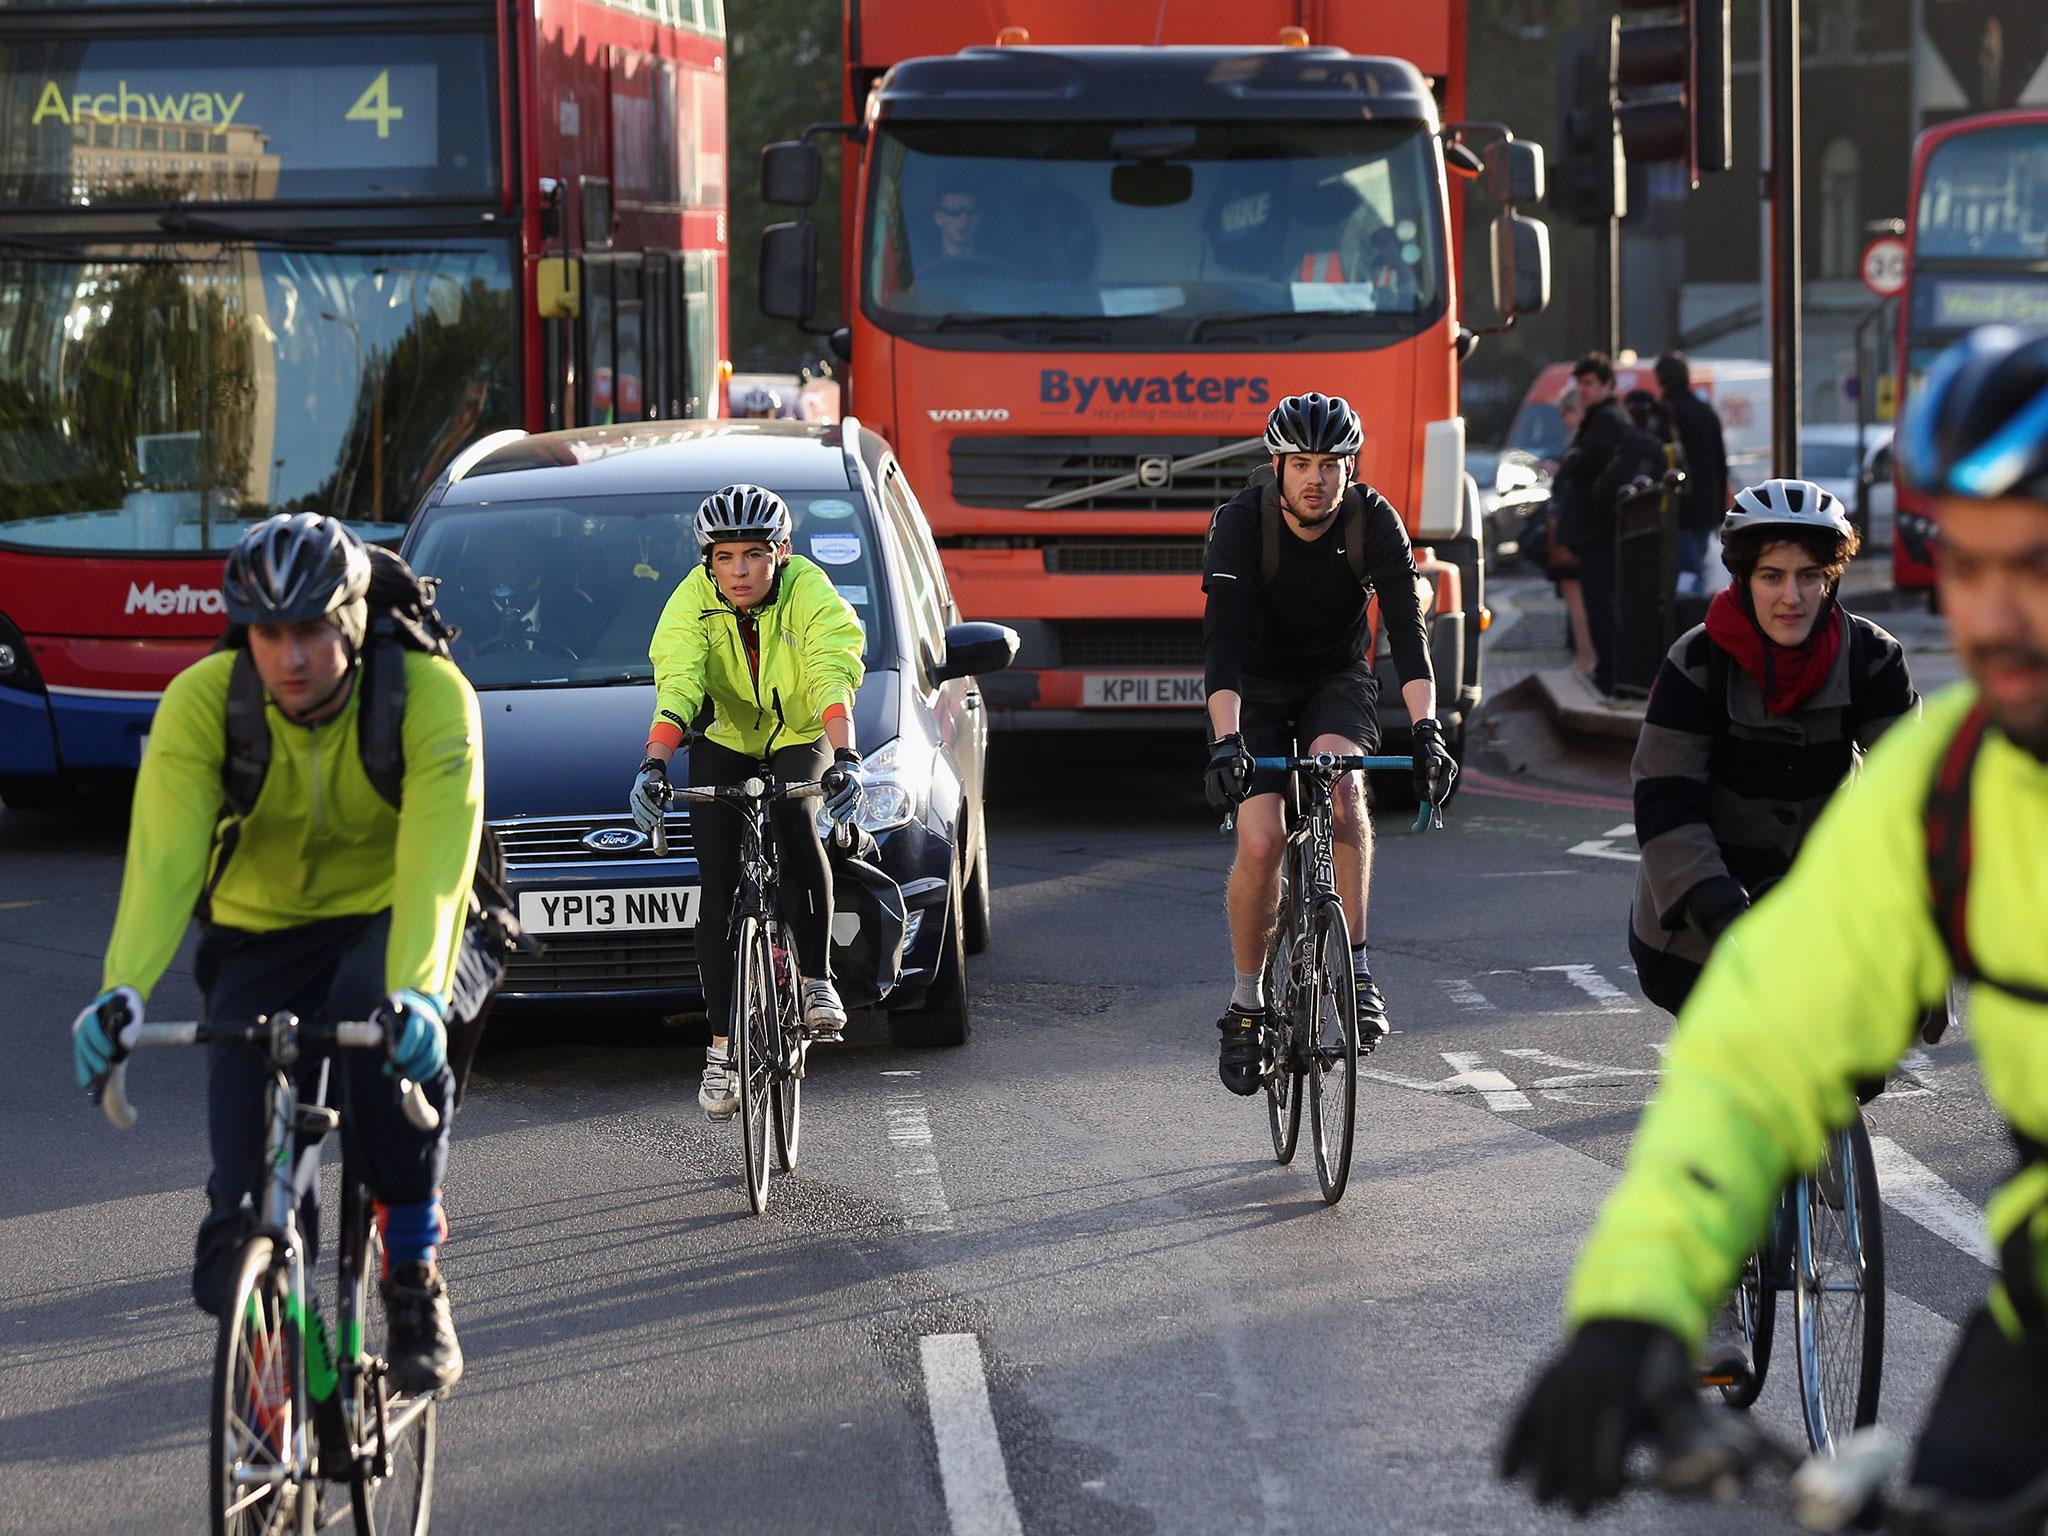 Around 75 per cent of fatal or serious cyclist accidents occur in urban areas